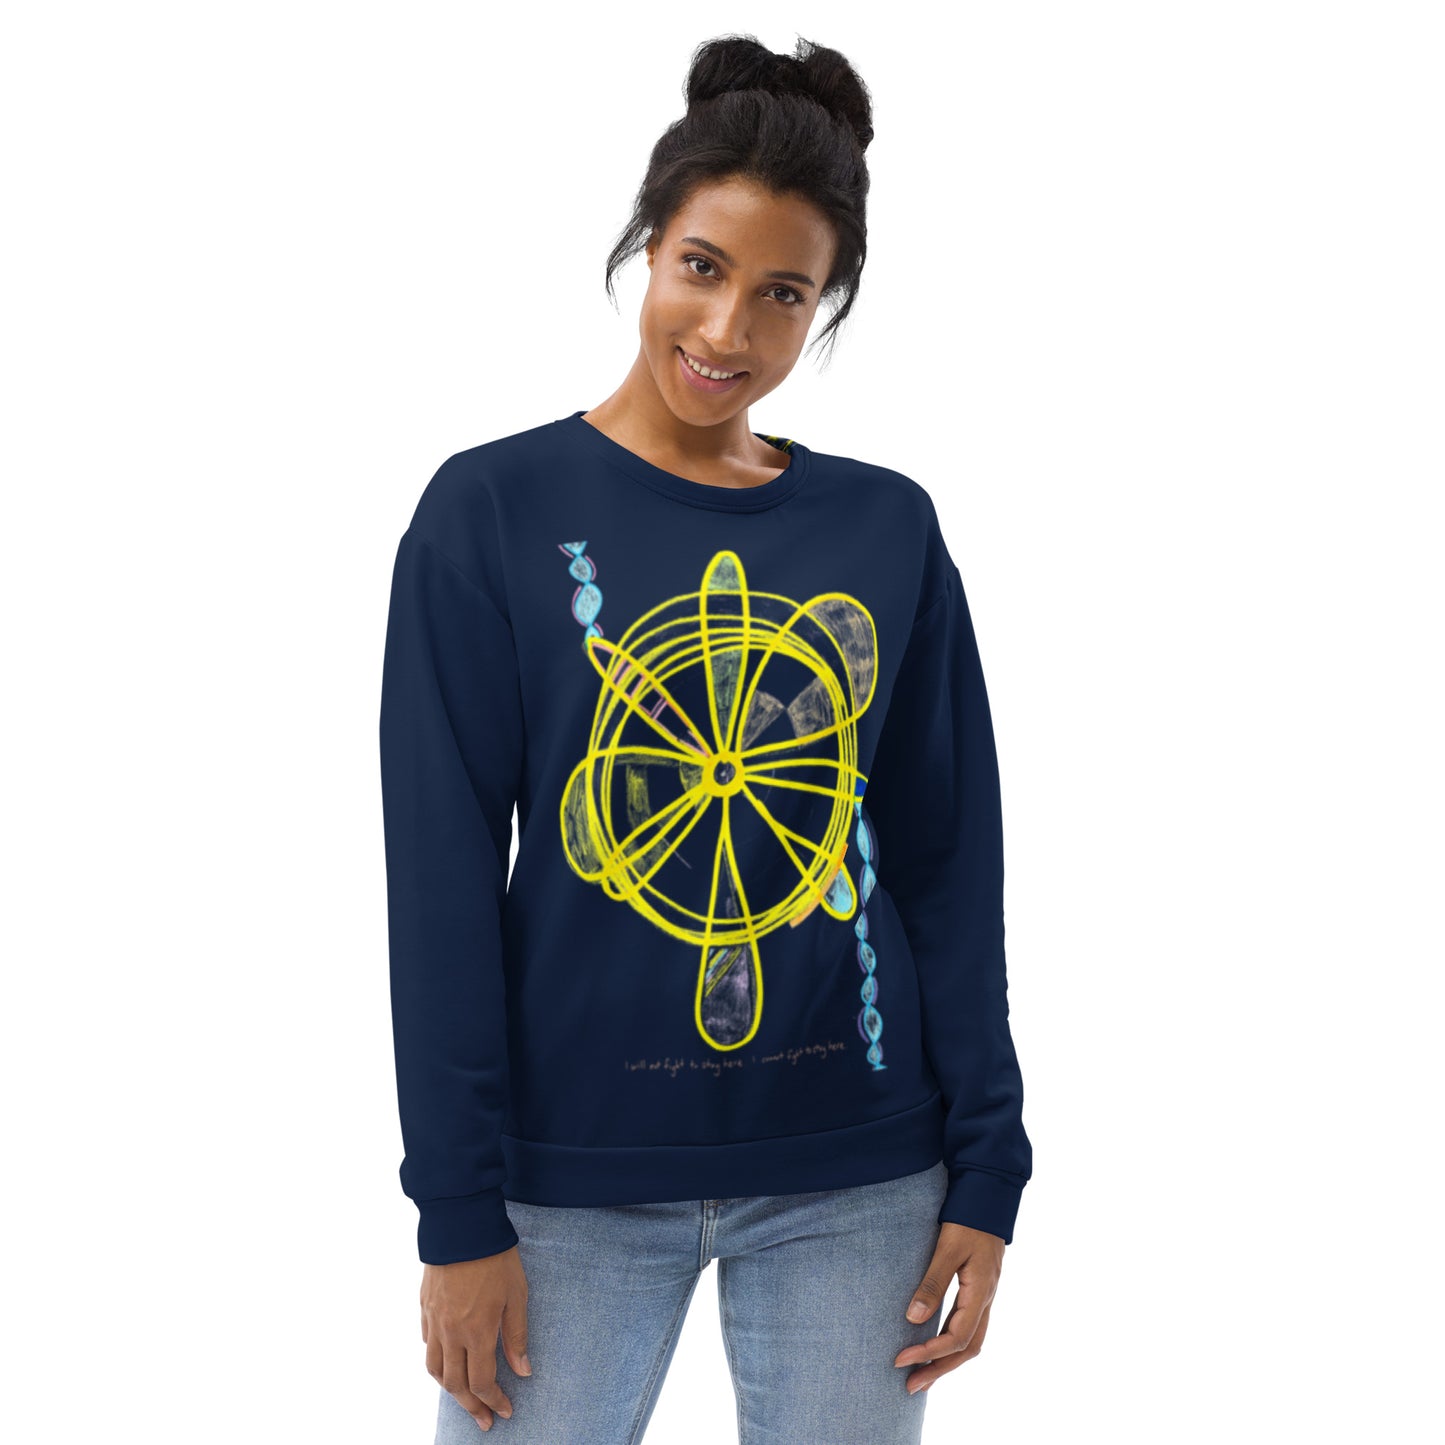 I will not fight to stay here. I cannot fight to stay here. recycled unisex sweatshirt in dark blue